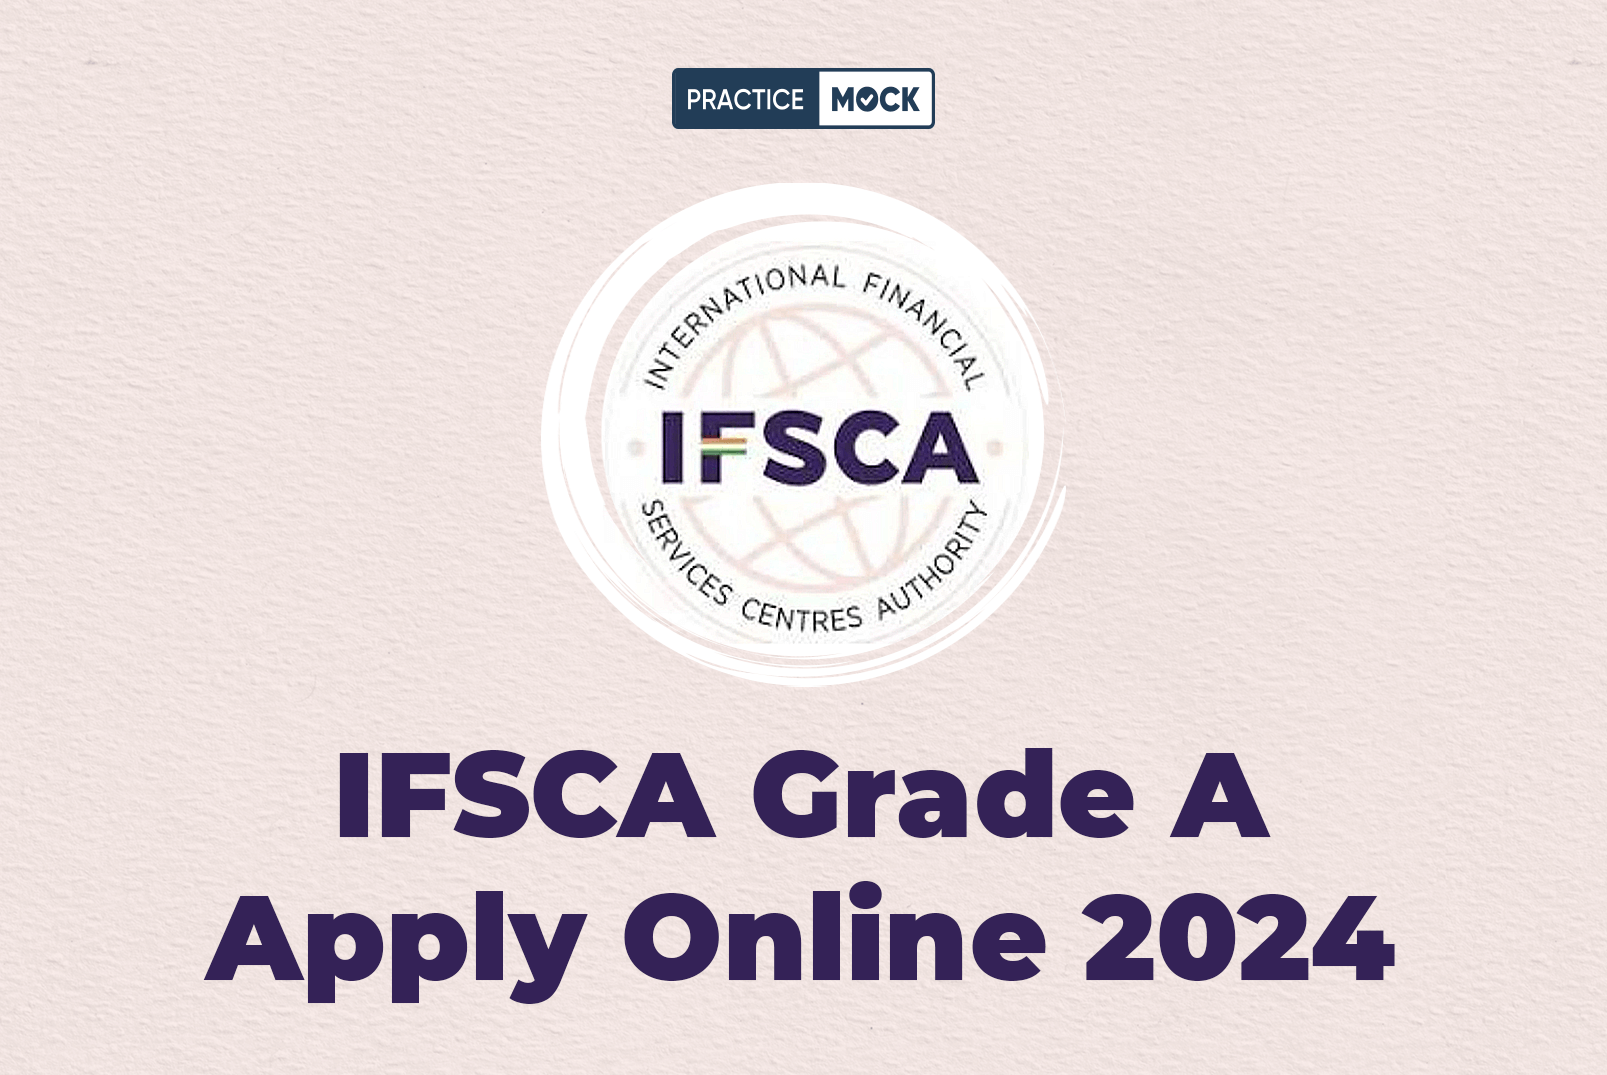 IFSCA Grade A Apply Online 2024 Starts for 10 AM Posts